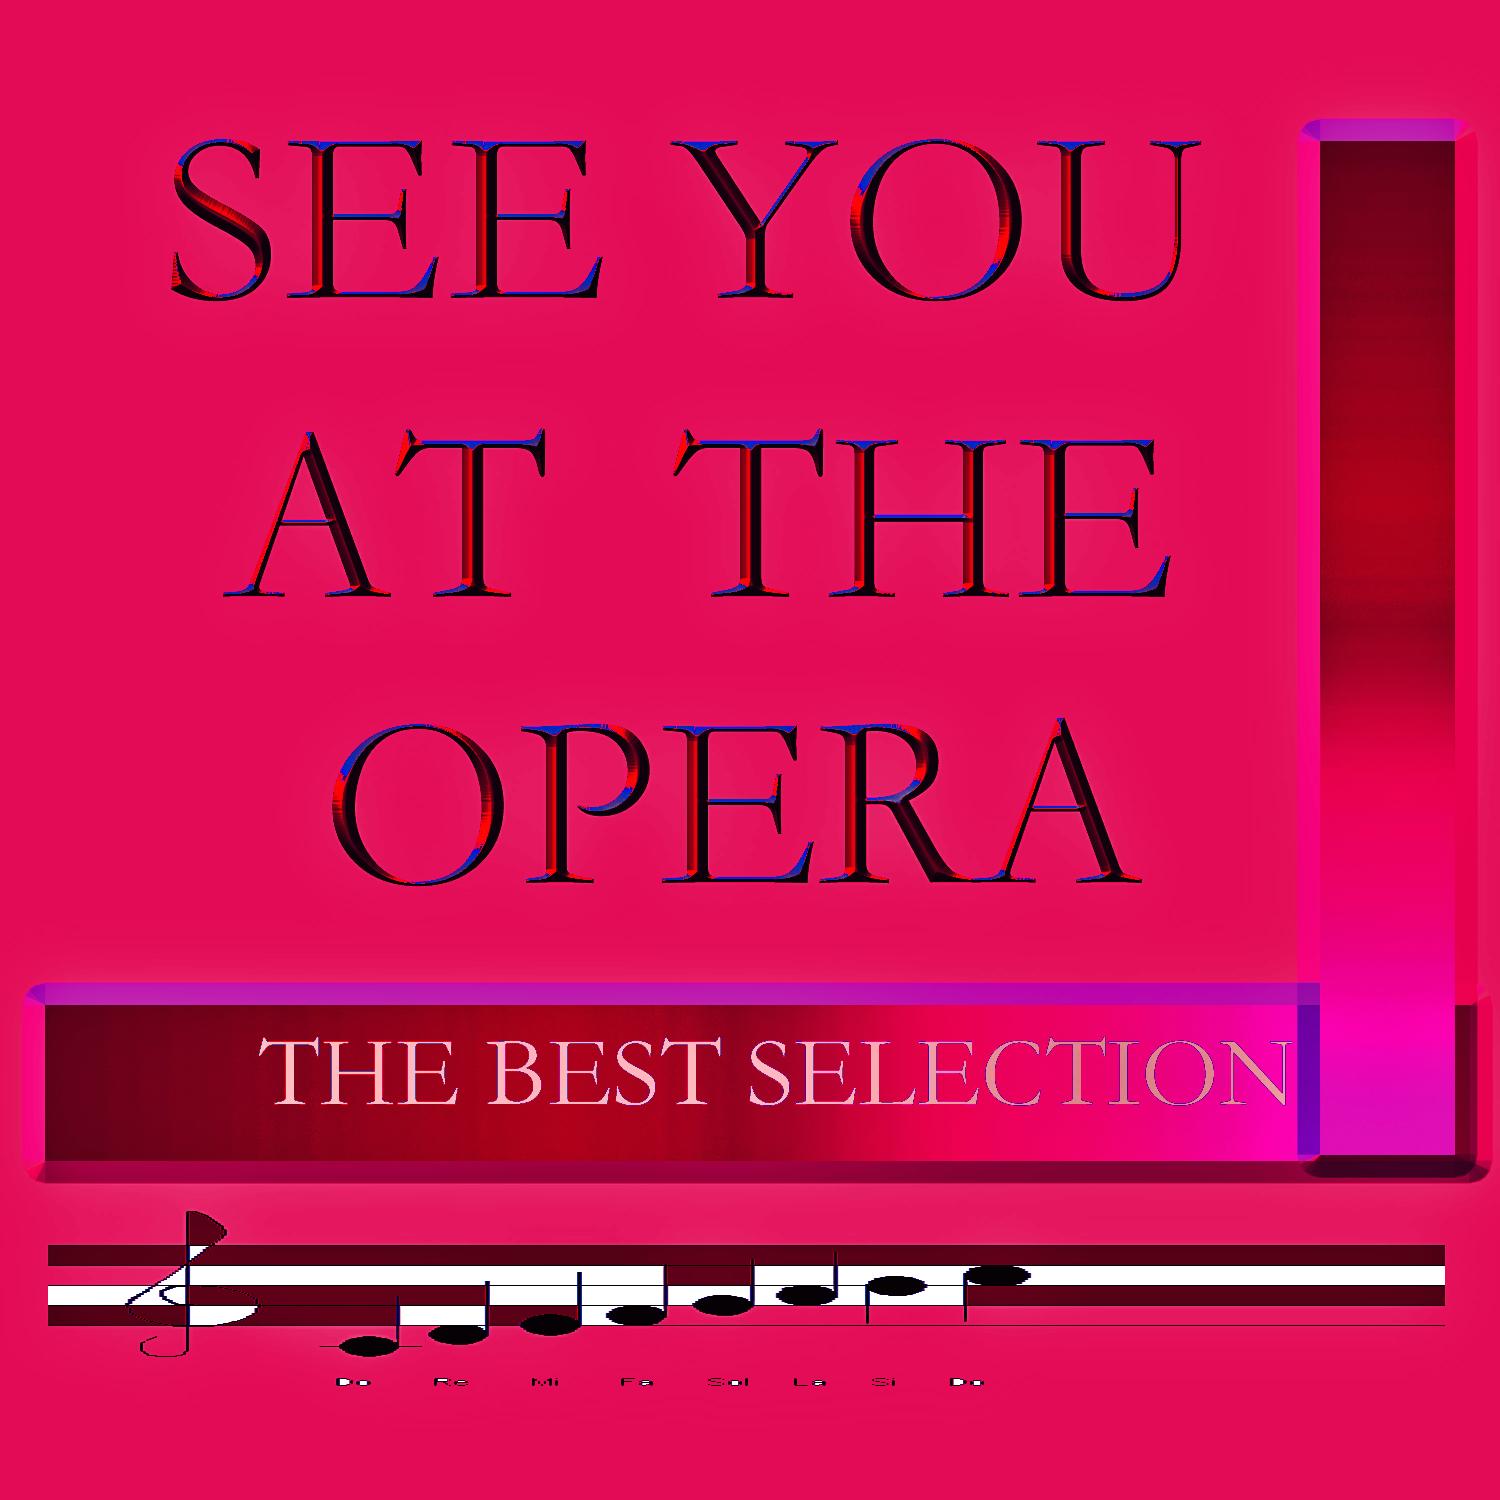 See you at the Opera